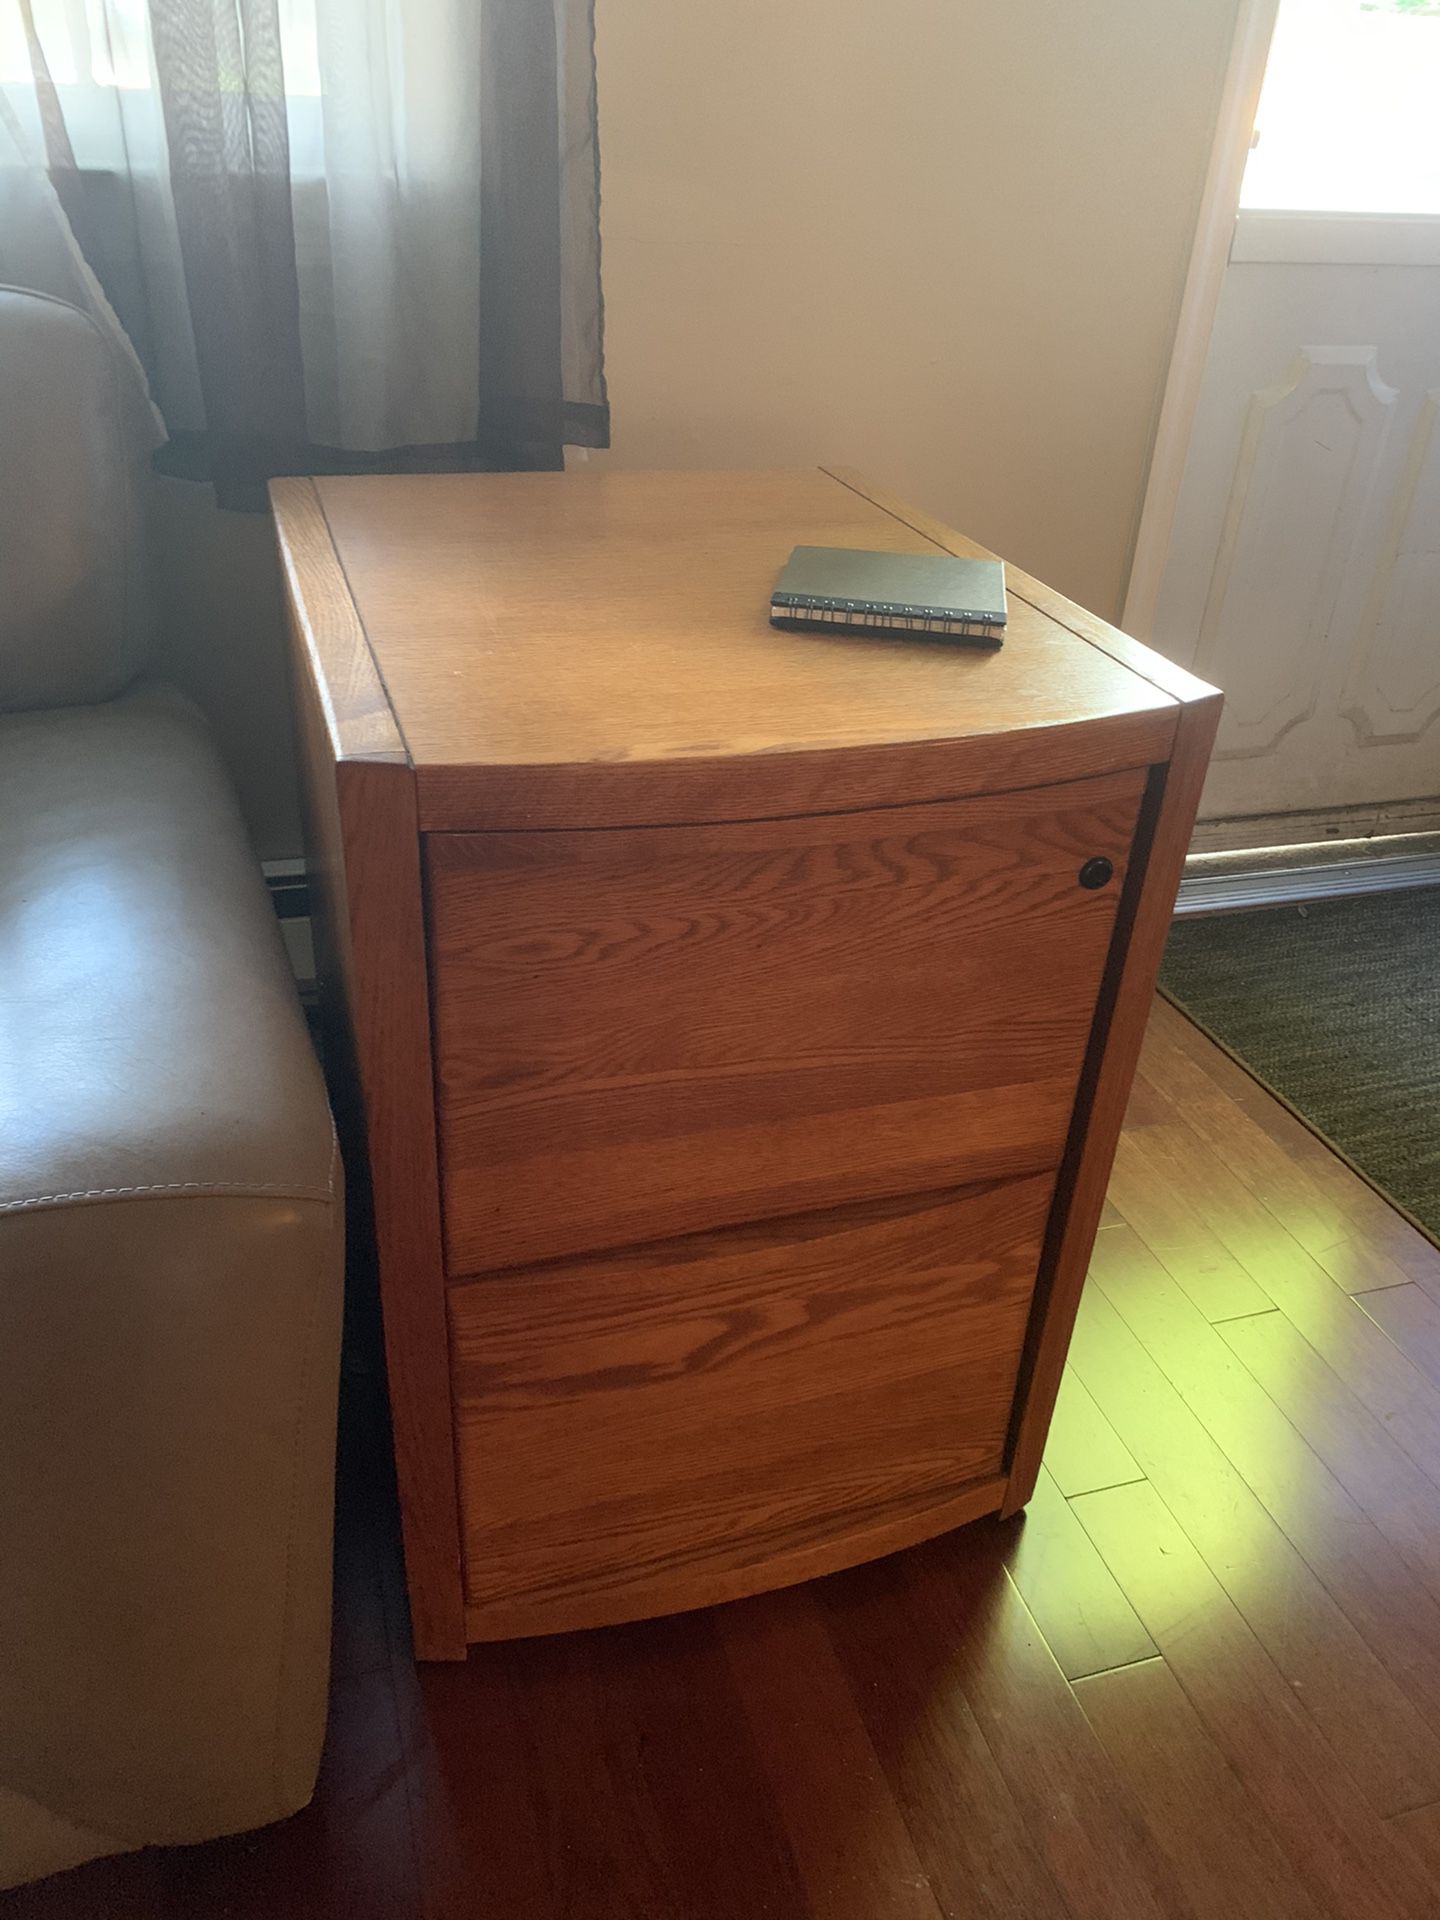 2-drawer filing cabinet. SOLID OAK! No junky Particleboard. $65 or best offer holds both legal size and let her size files. Very good condition.